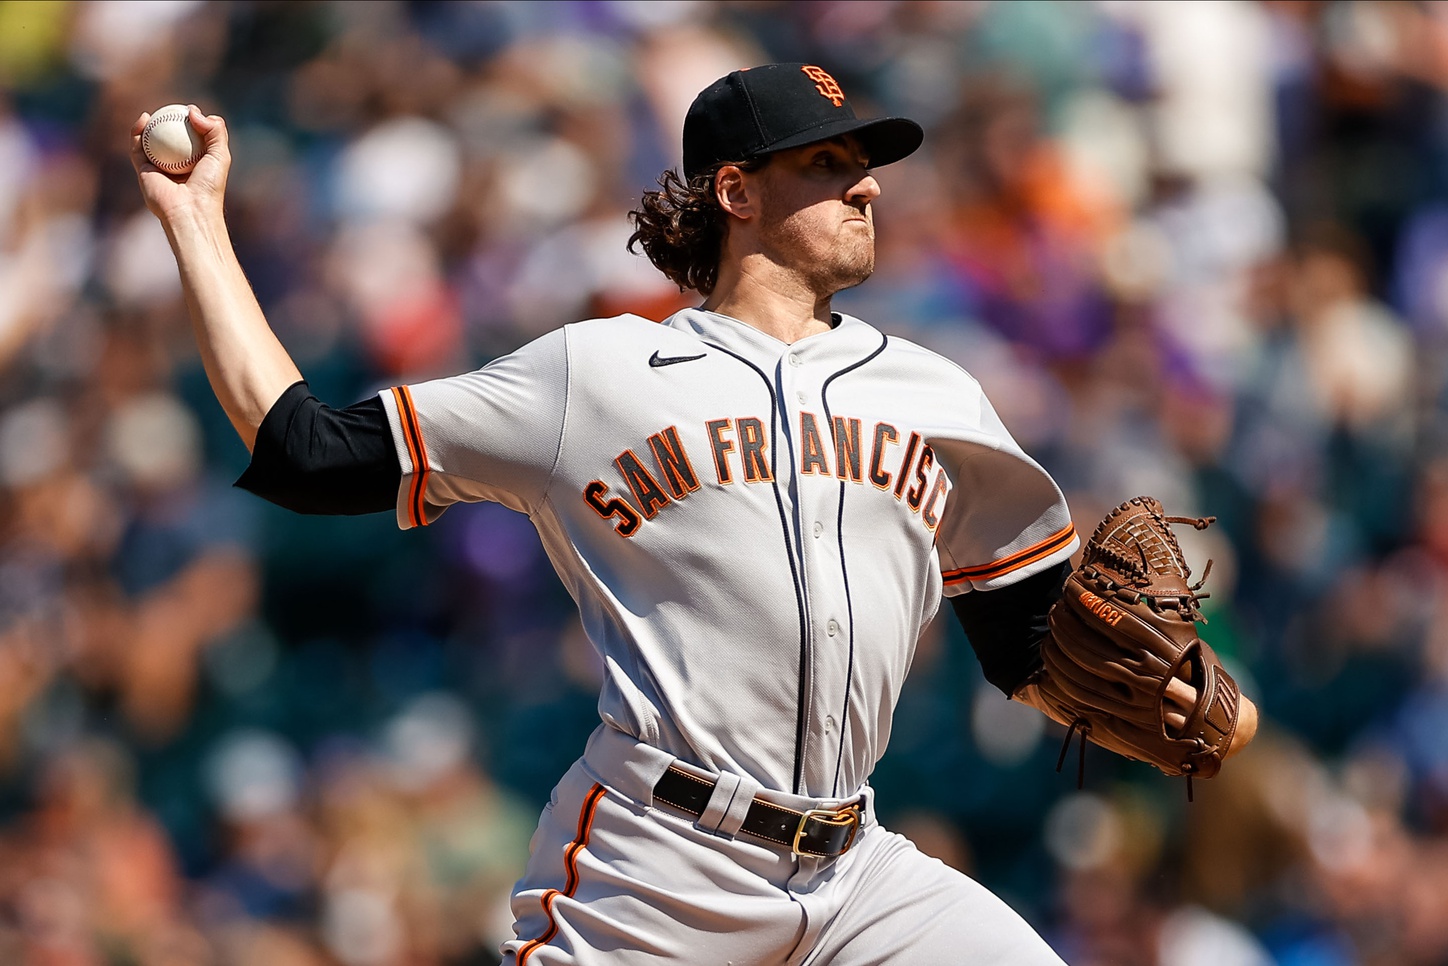 Gausman's time with the Giants, the Rockies' NL West foe, helped him acclimate to Coors Field.